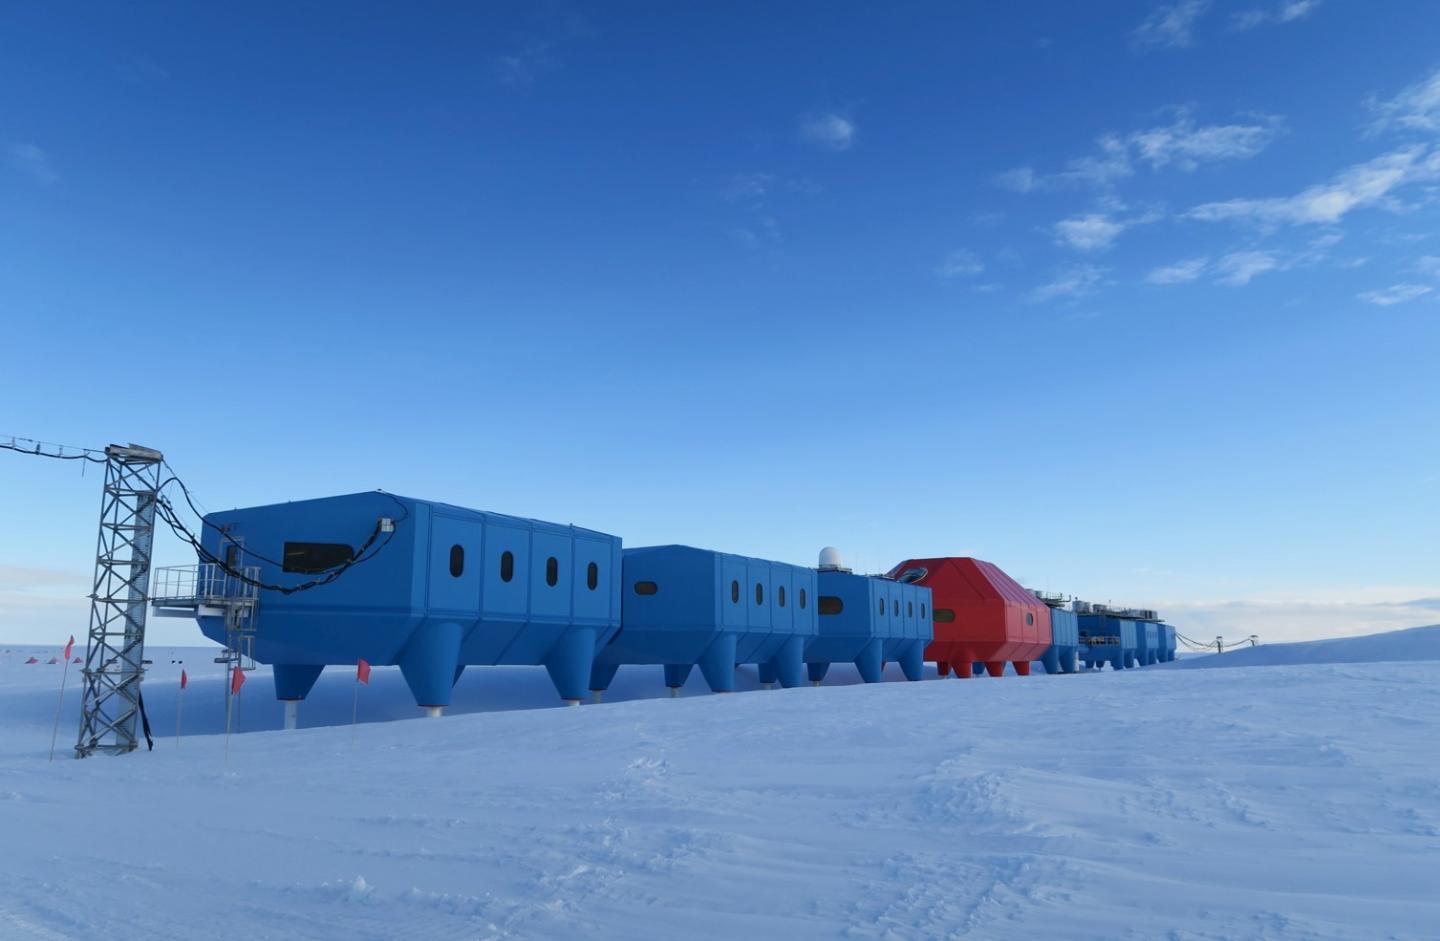 The Halley Research Base